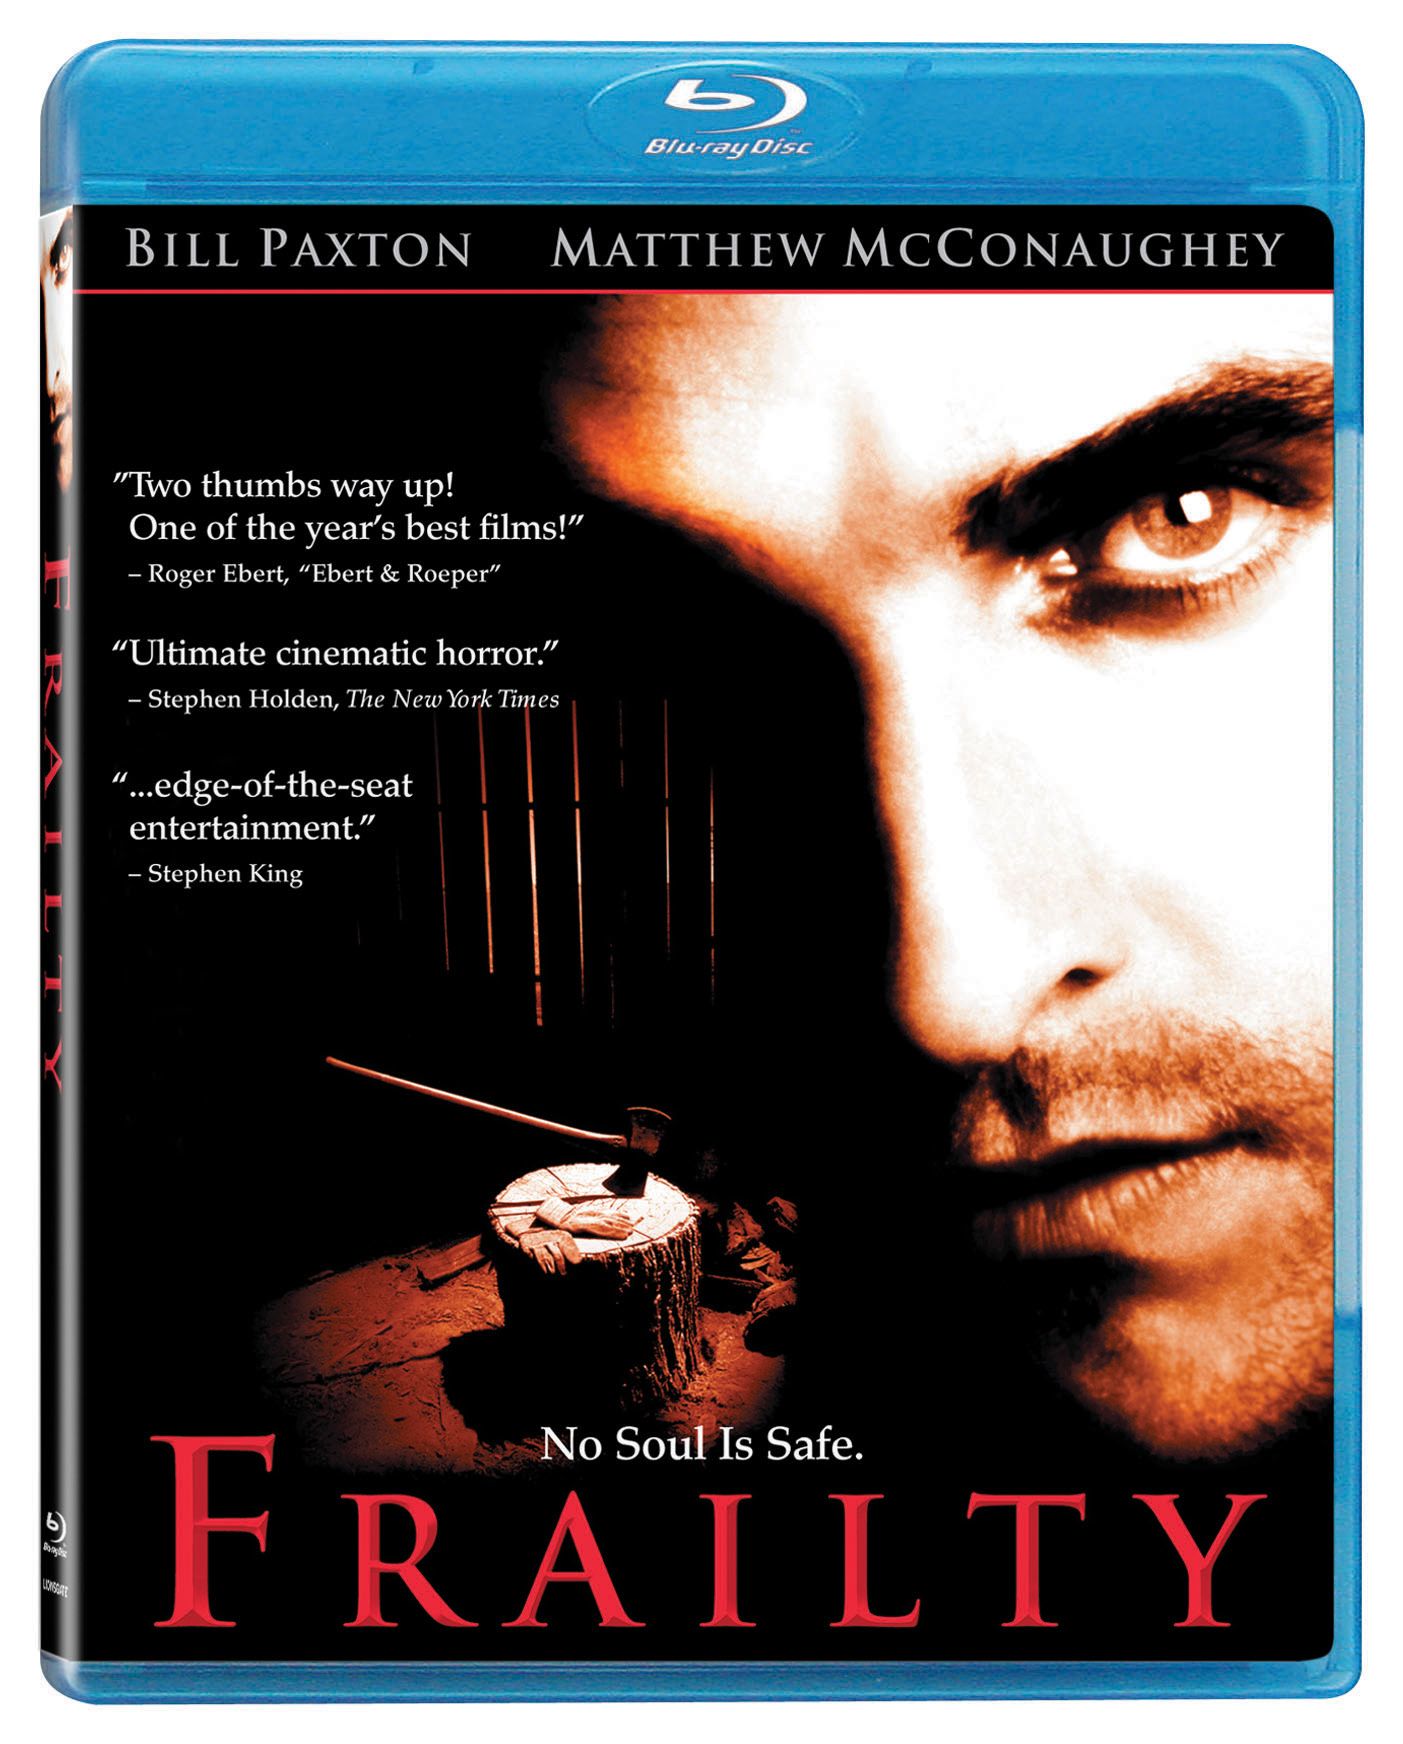 Frailty Gets a Thrilling Blu-ray Upgrade on November 24th